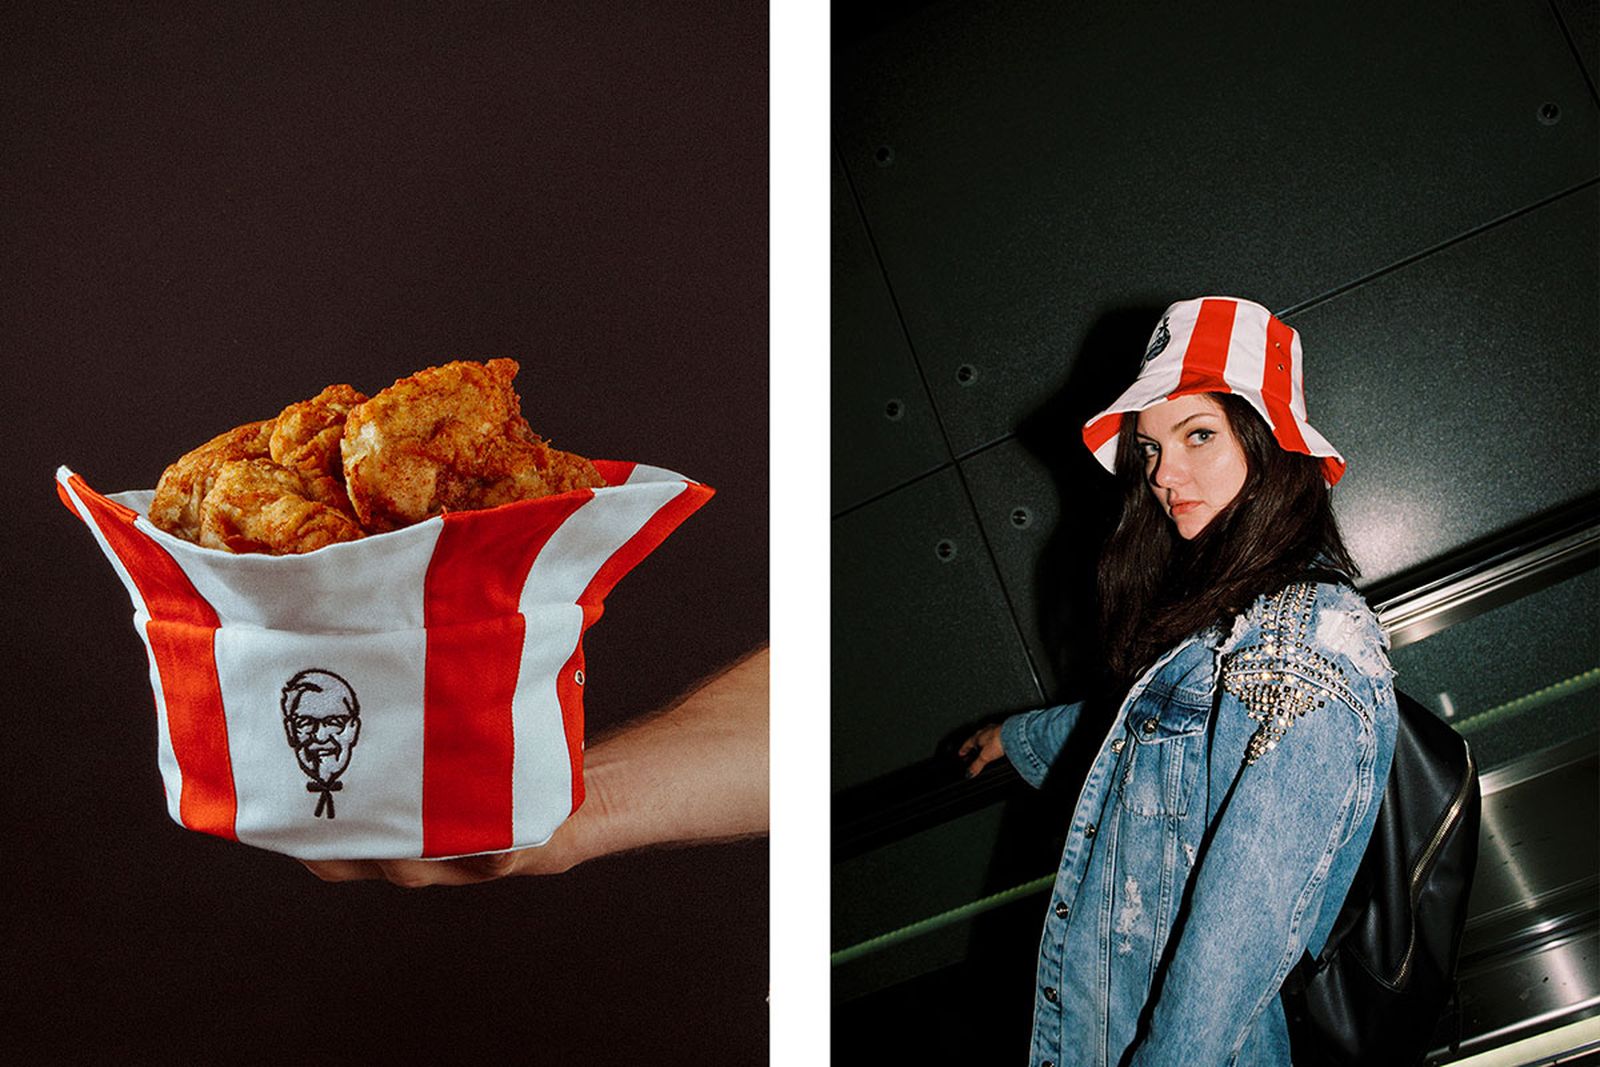 kfc russia launches limited edition bucket hat Mam Cupy